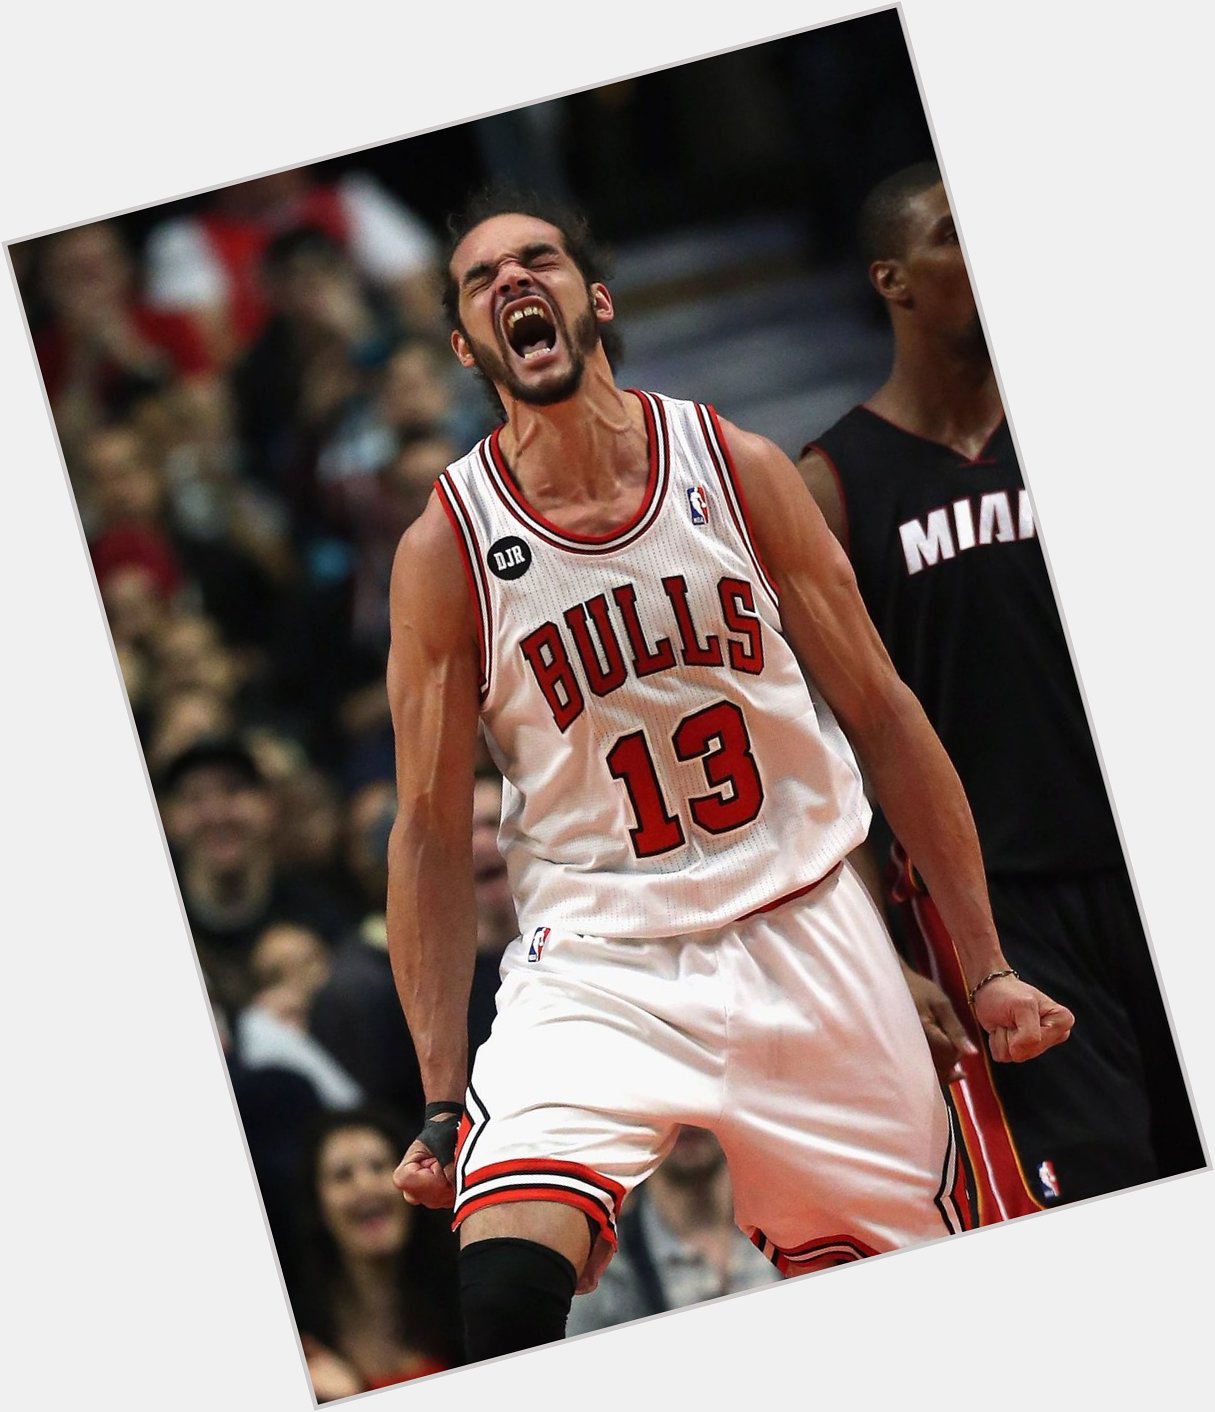 Happy Birthday to the one and only Joakim Noah!  Chicago LEGEND! 